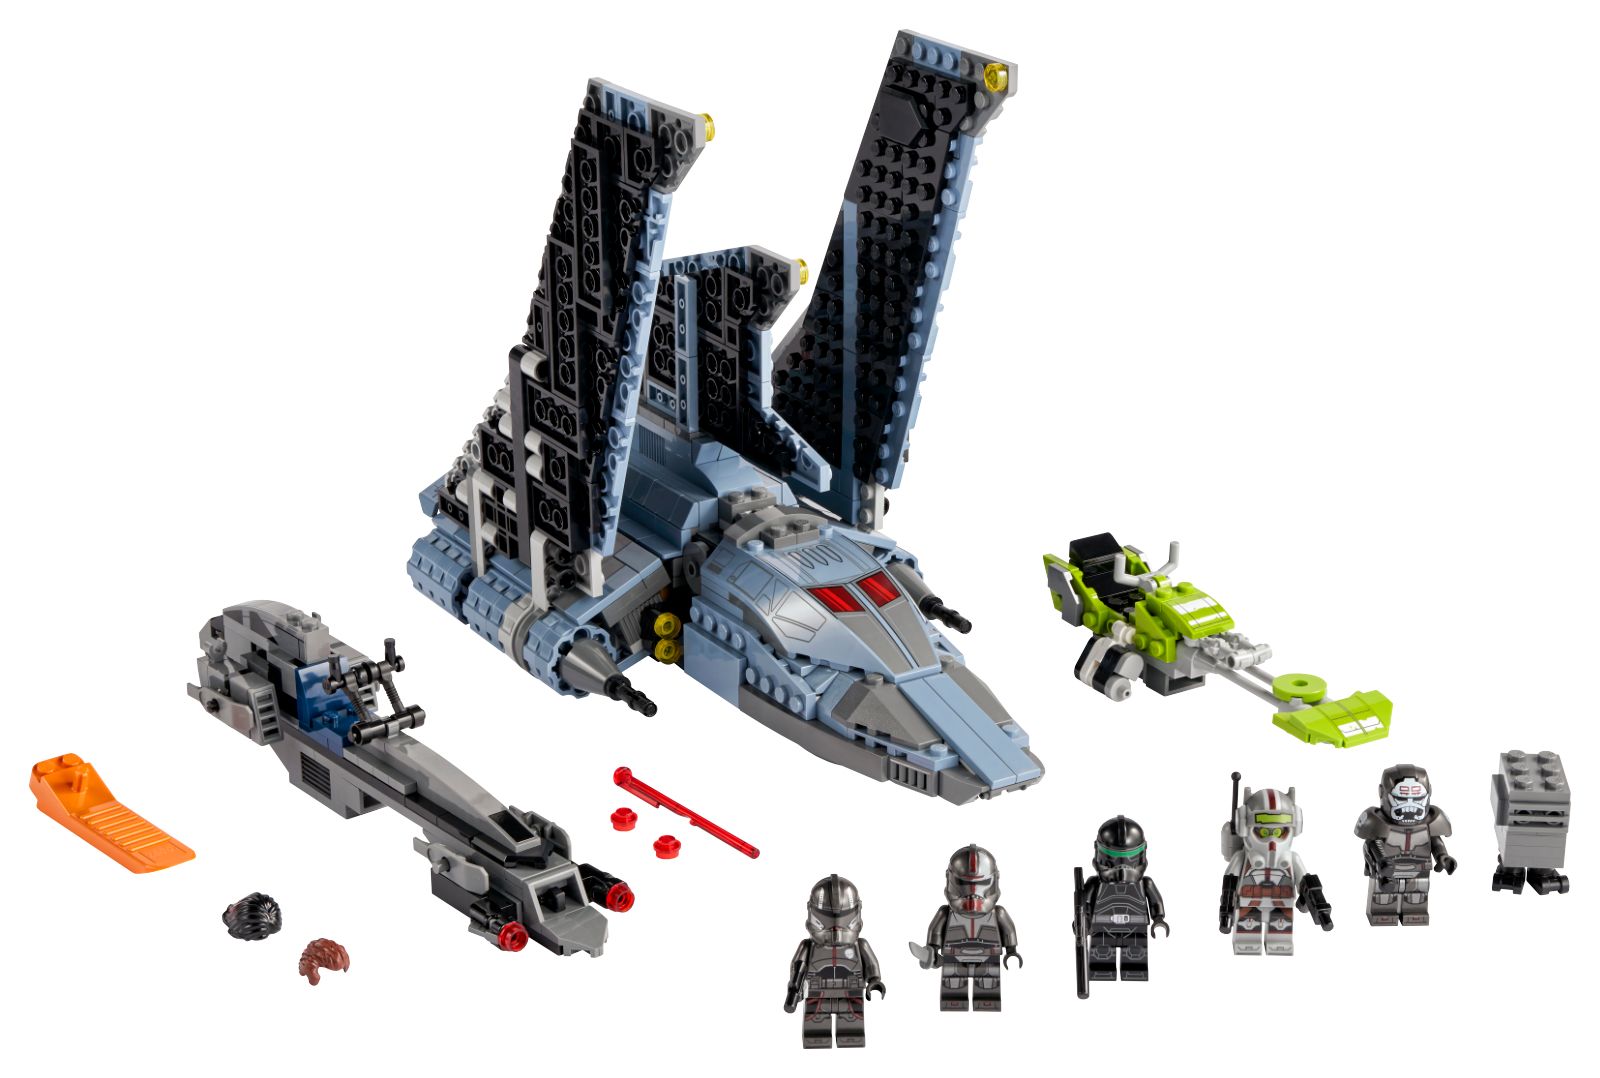 Lego Star Wars latest is The Bad Batch Attack Shuttle photo 2